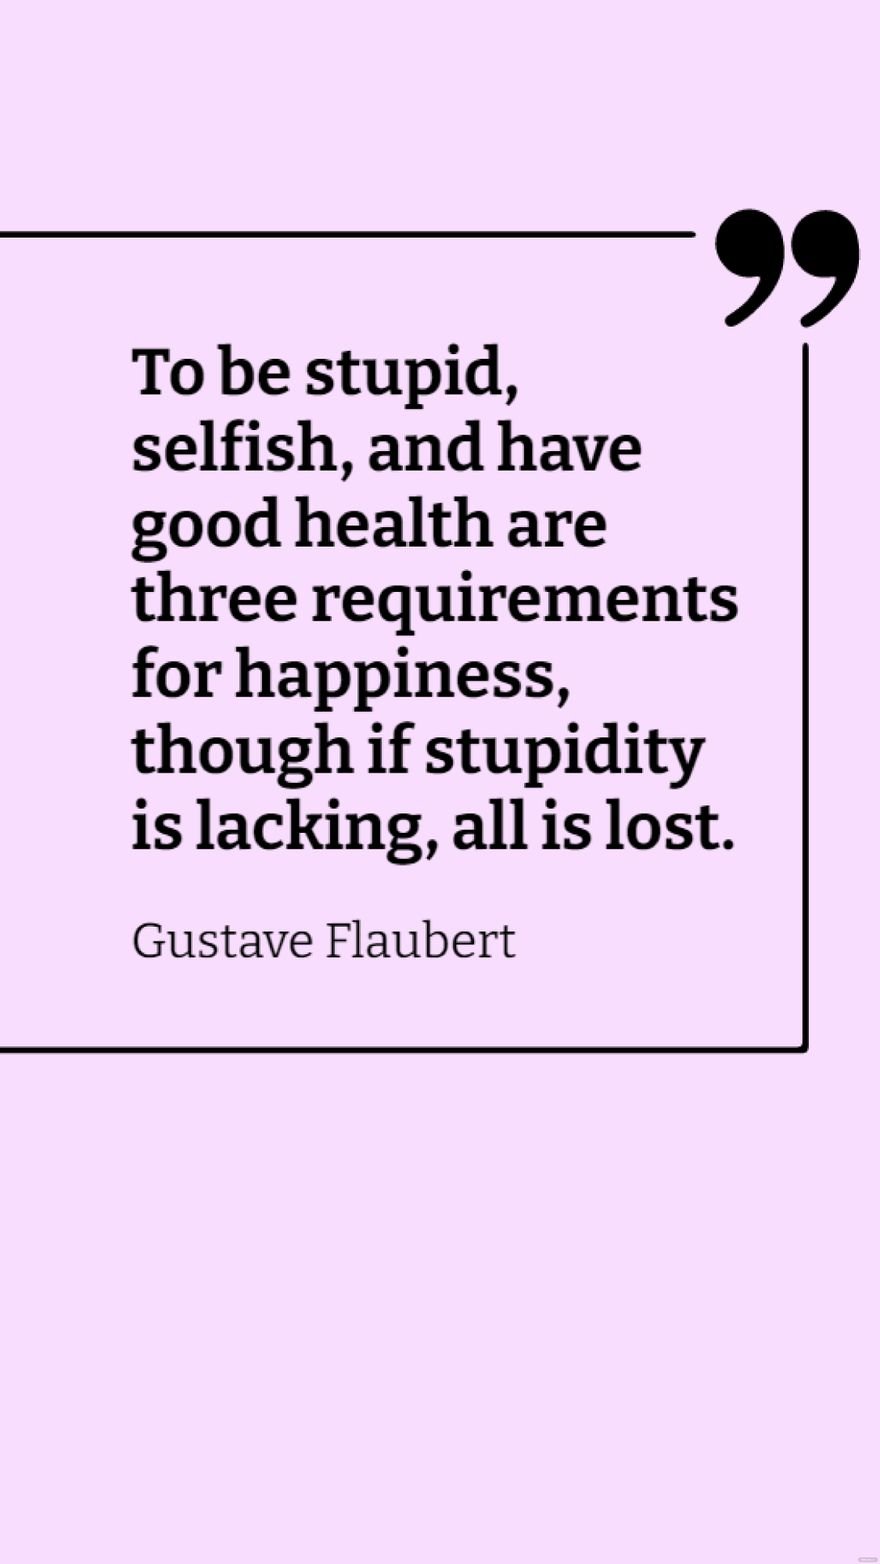 Free Gustave Flaubert - To be stupid, selfish, and have good health are three requirements for happiness, though if stupidity is lacking, all is lost. in JPG